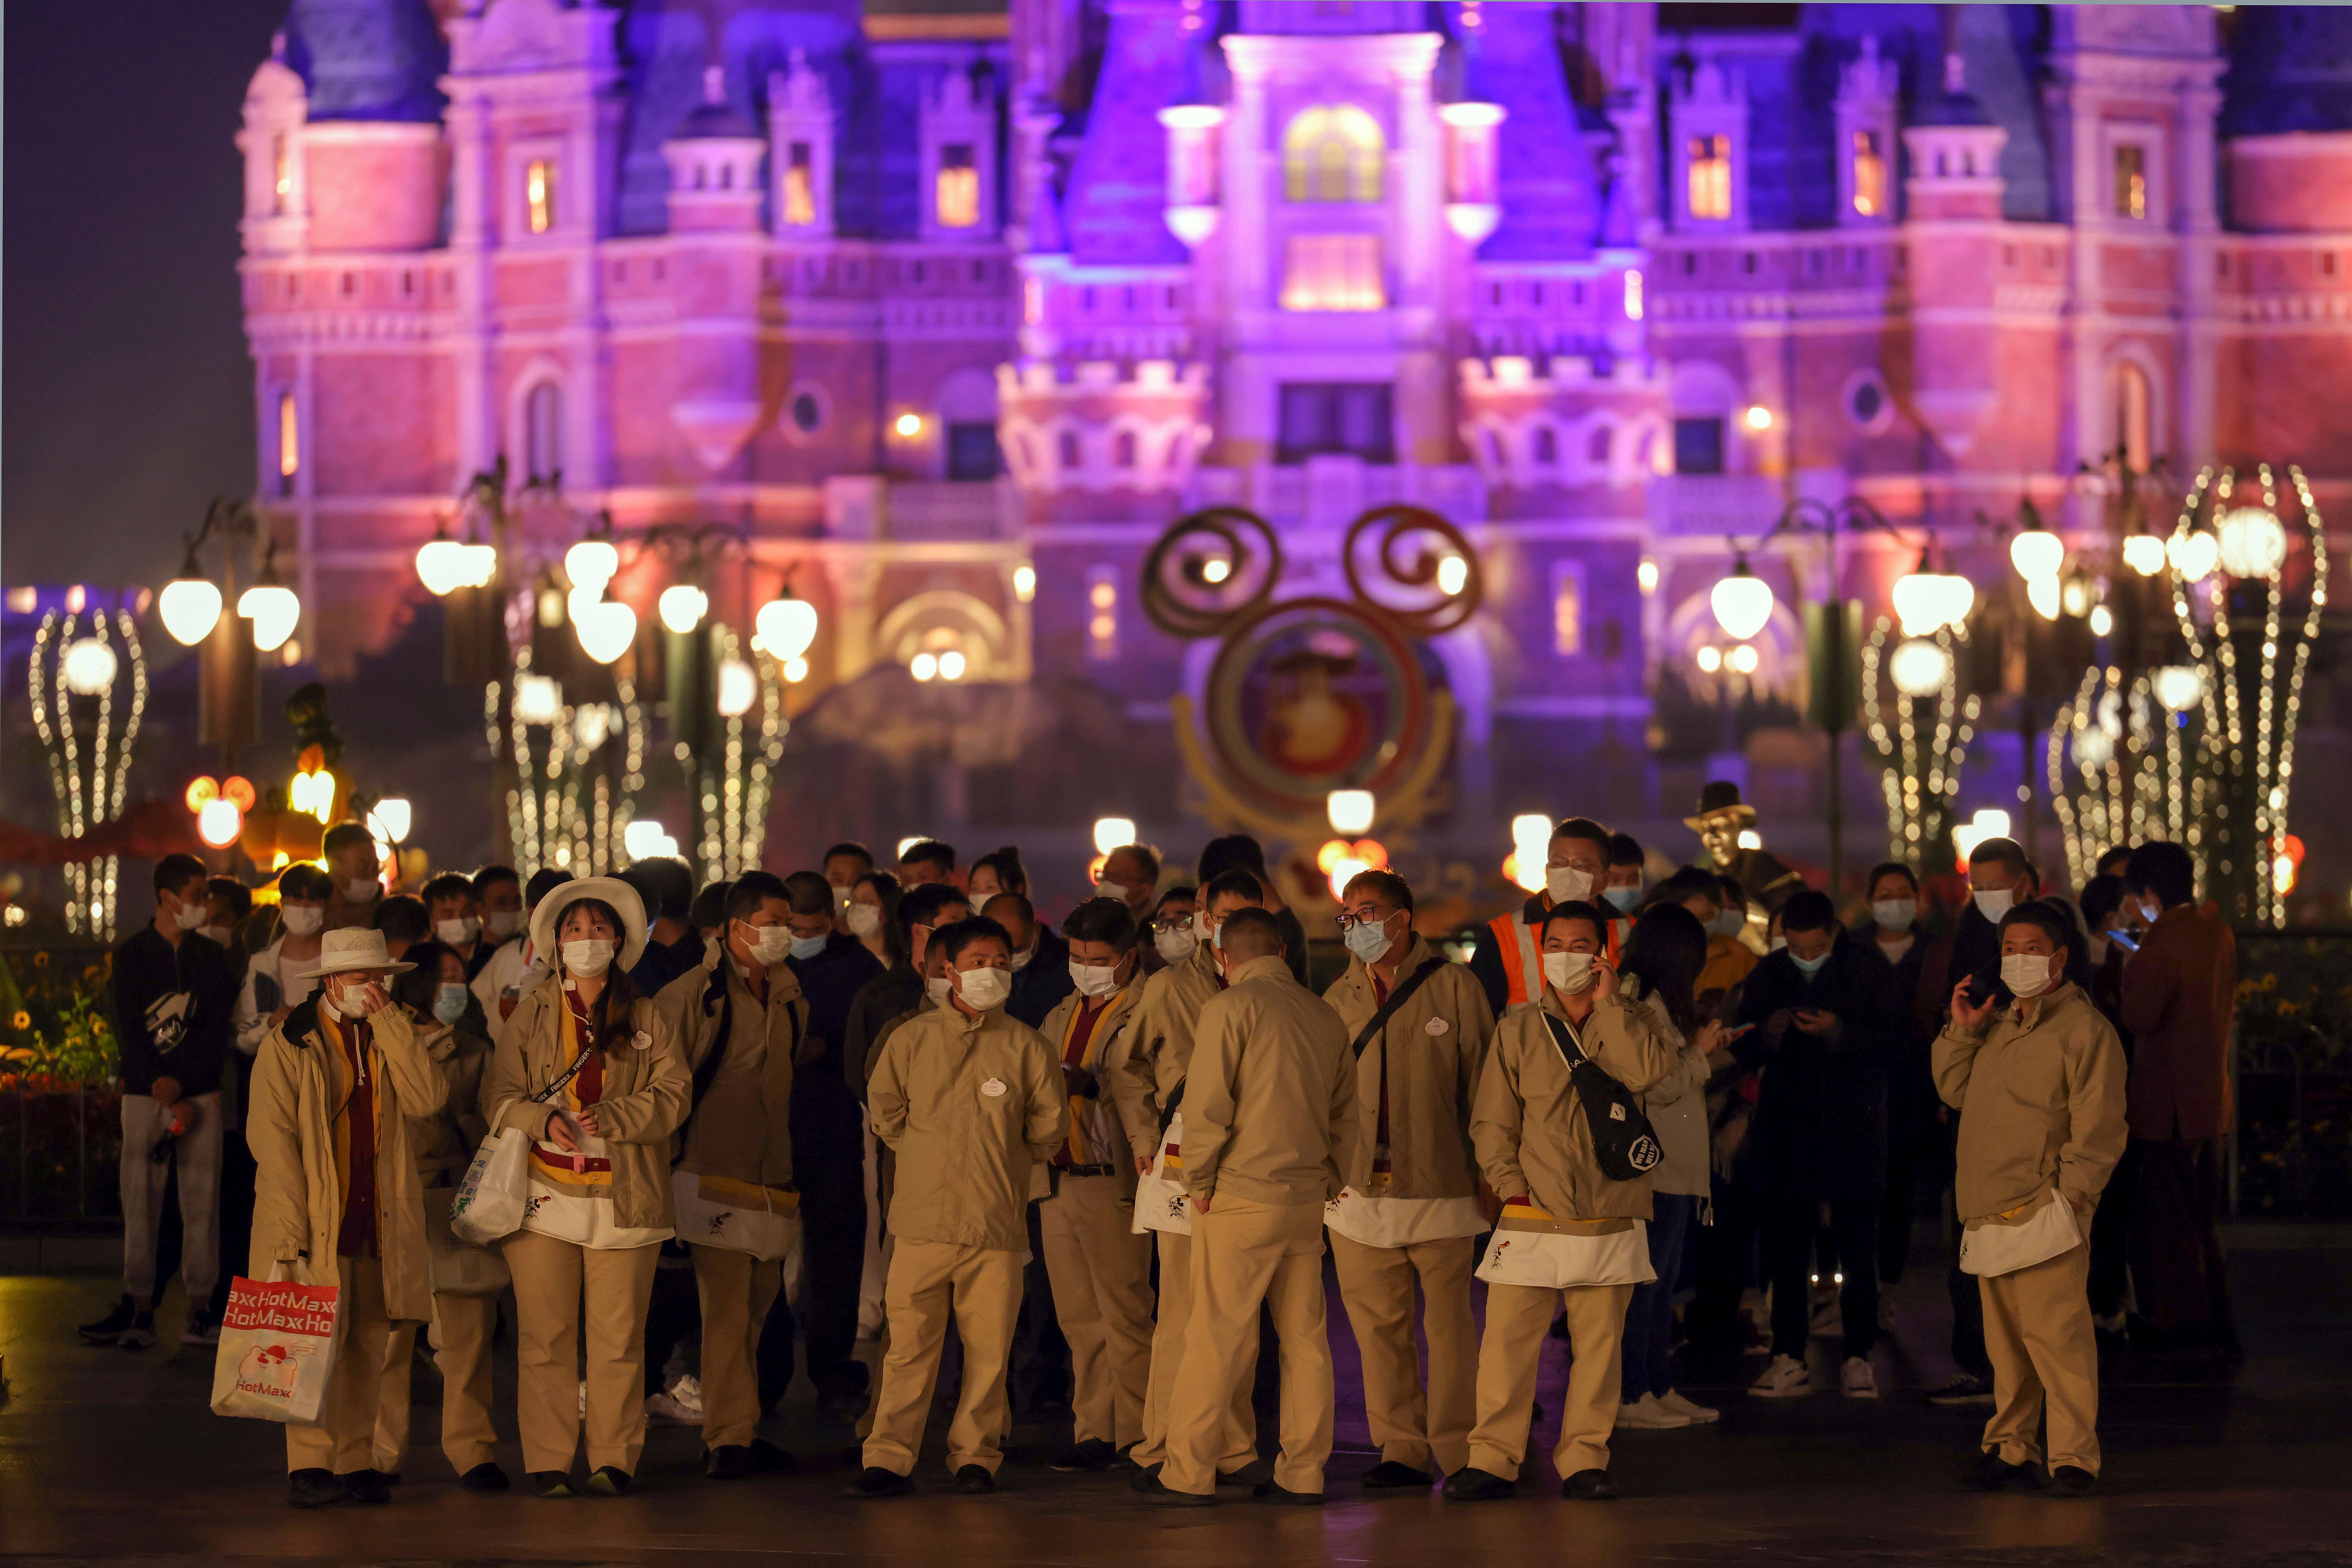 Disneyland employees gather to wait for their Covid-19 tests at the Shanghai Disney Resort